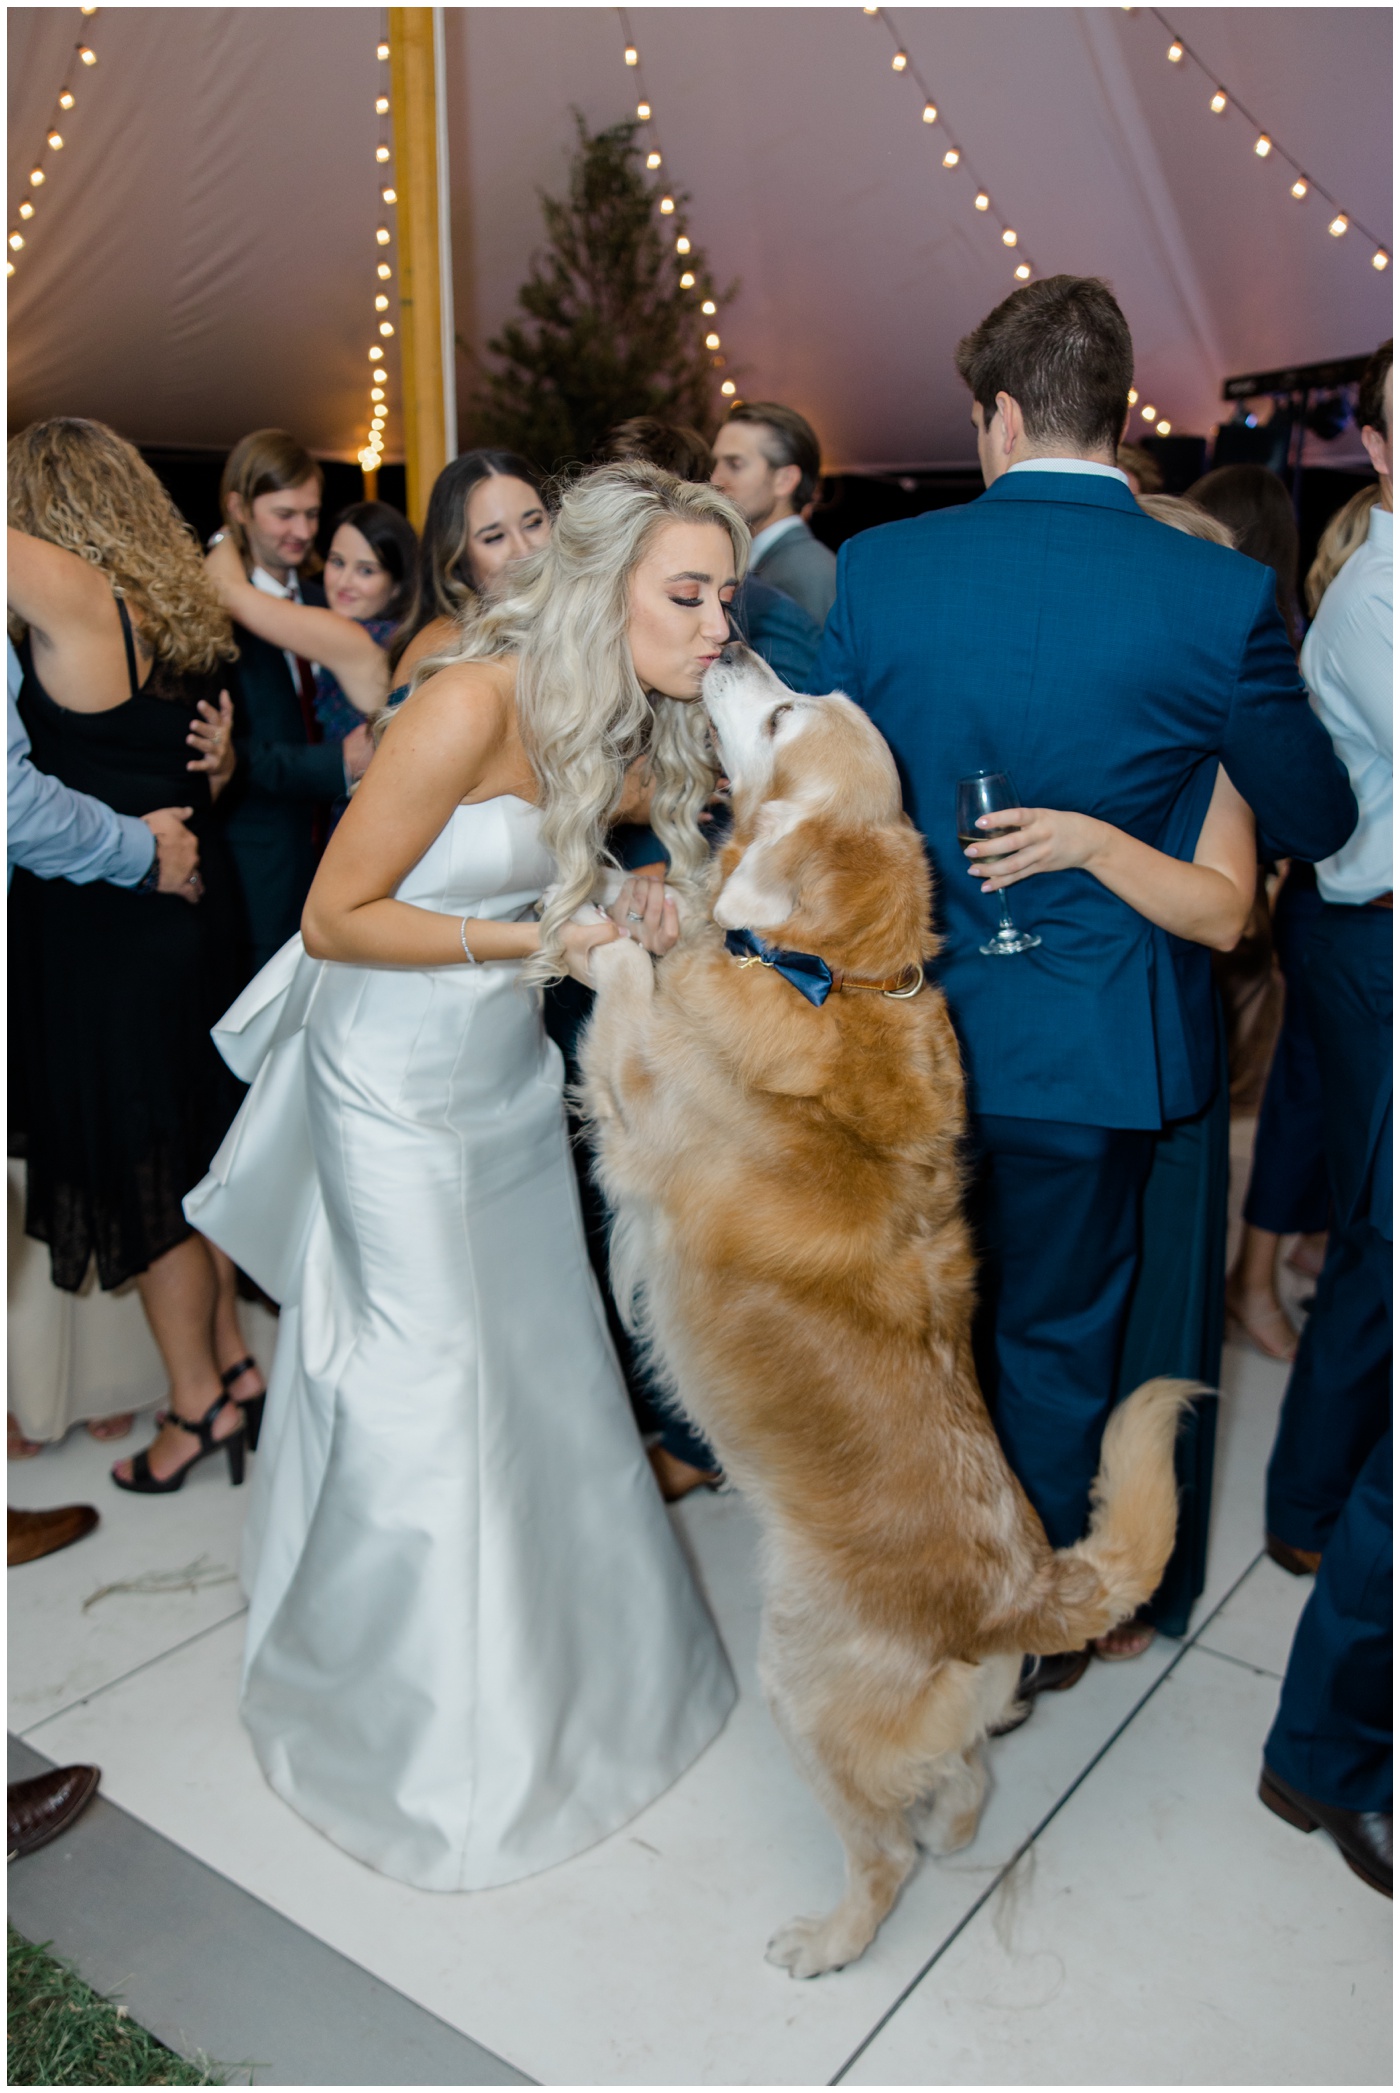 The bride dances with her dog during the wedding reception